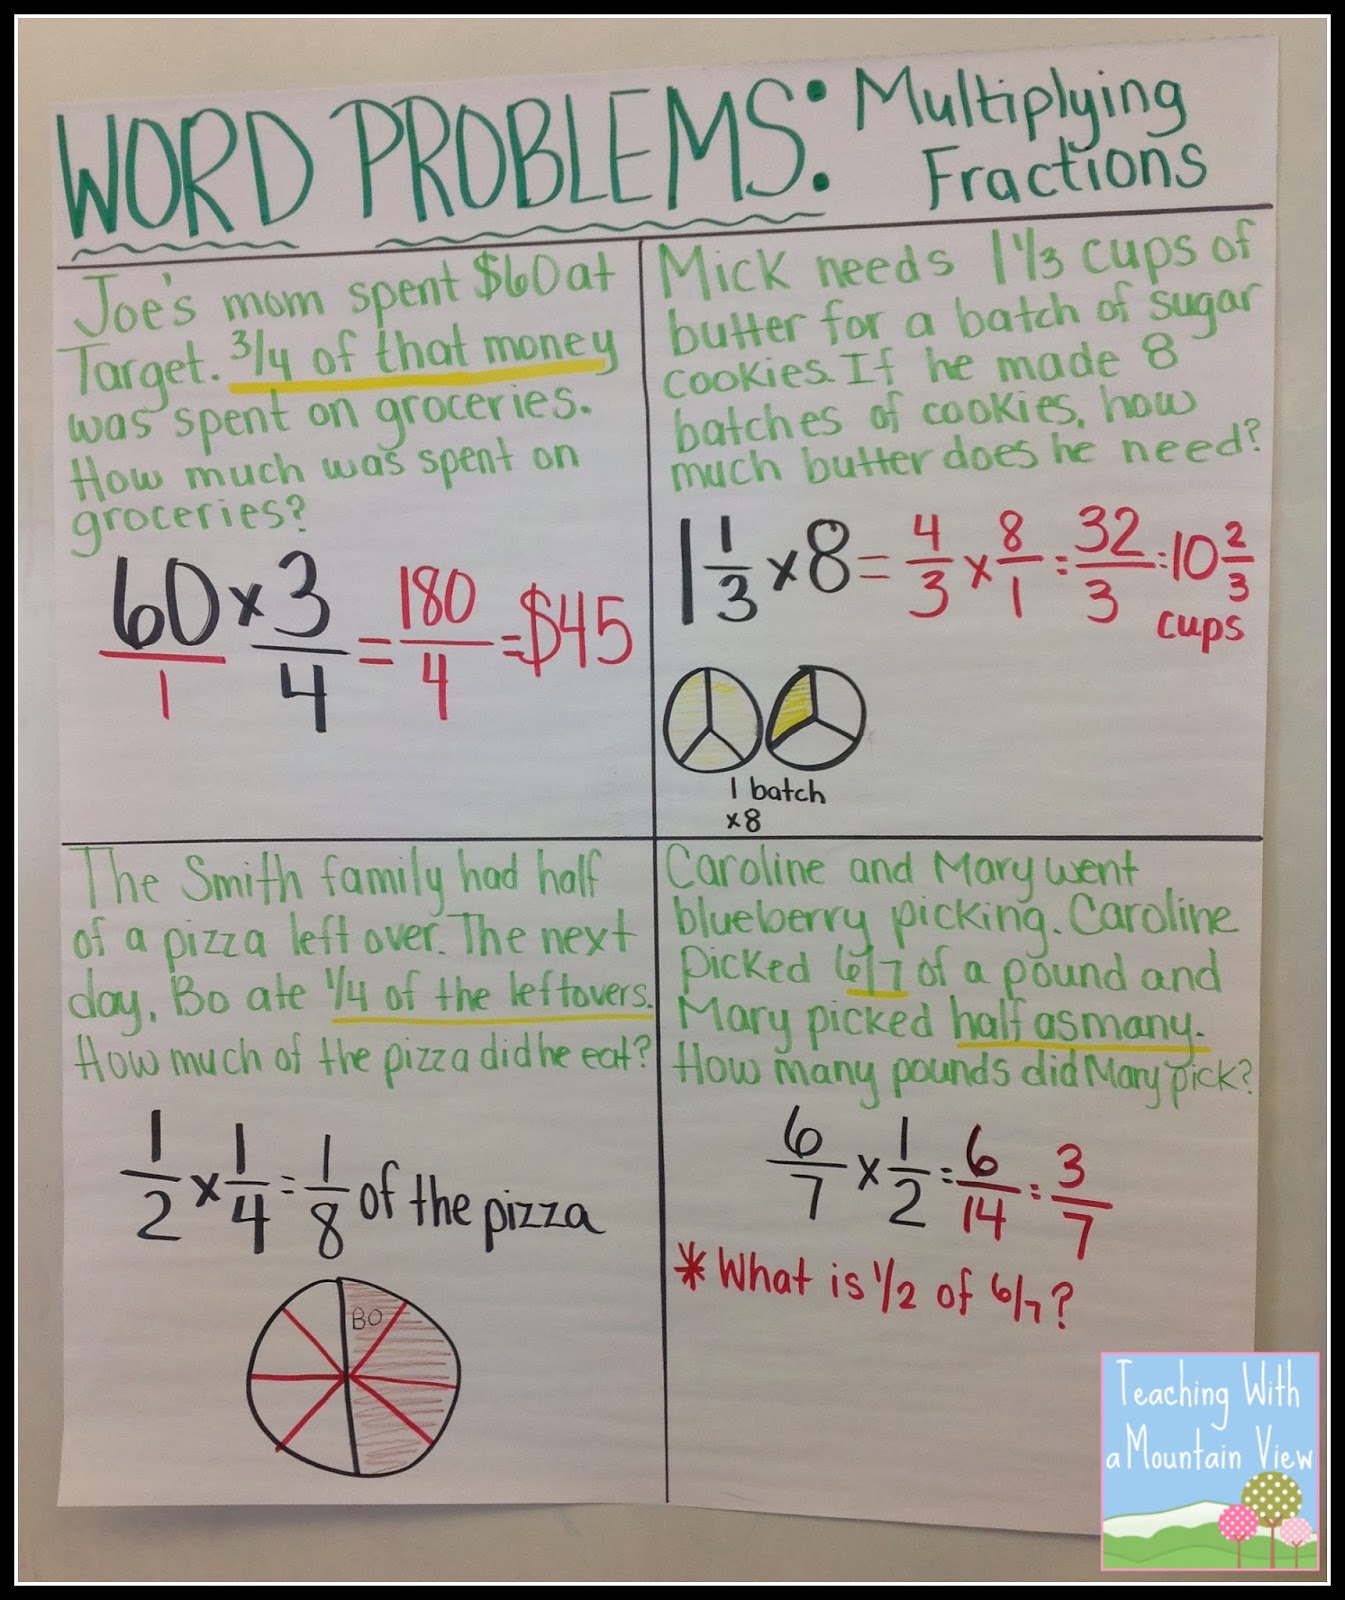 Multiplying Fractions Word Problems 5th Grade